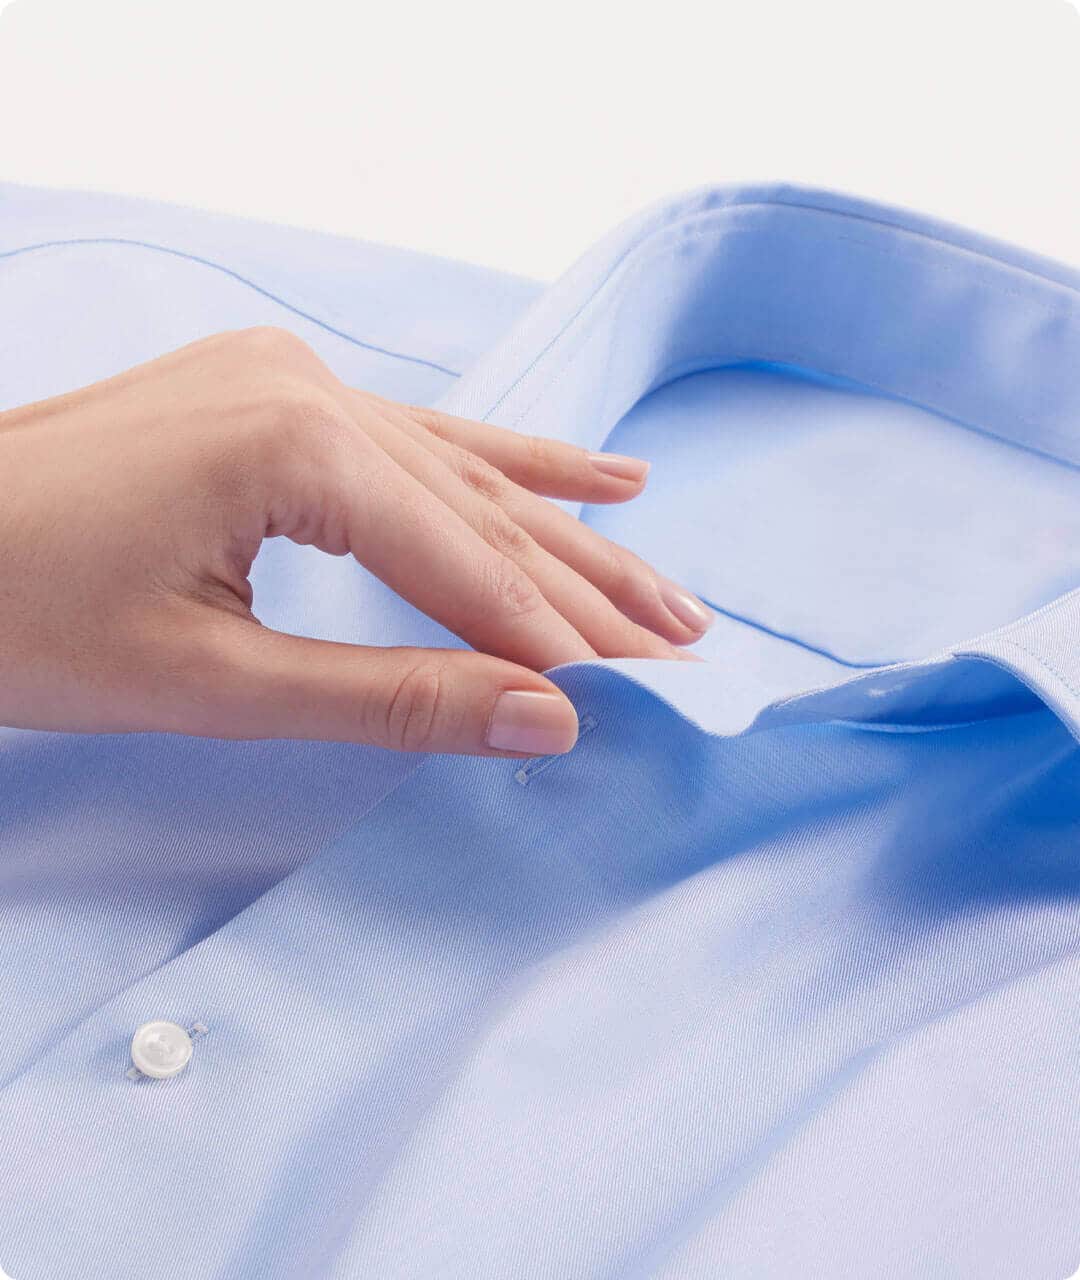 5 signs of perfect ironing